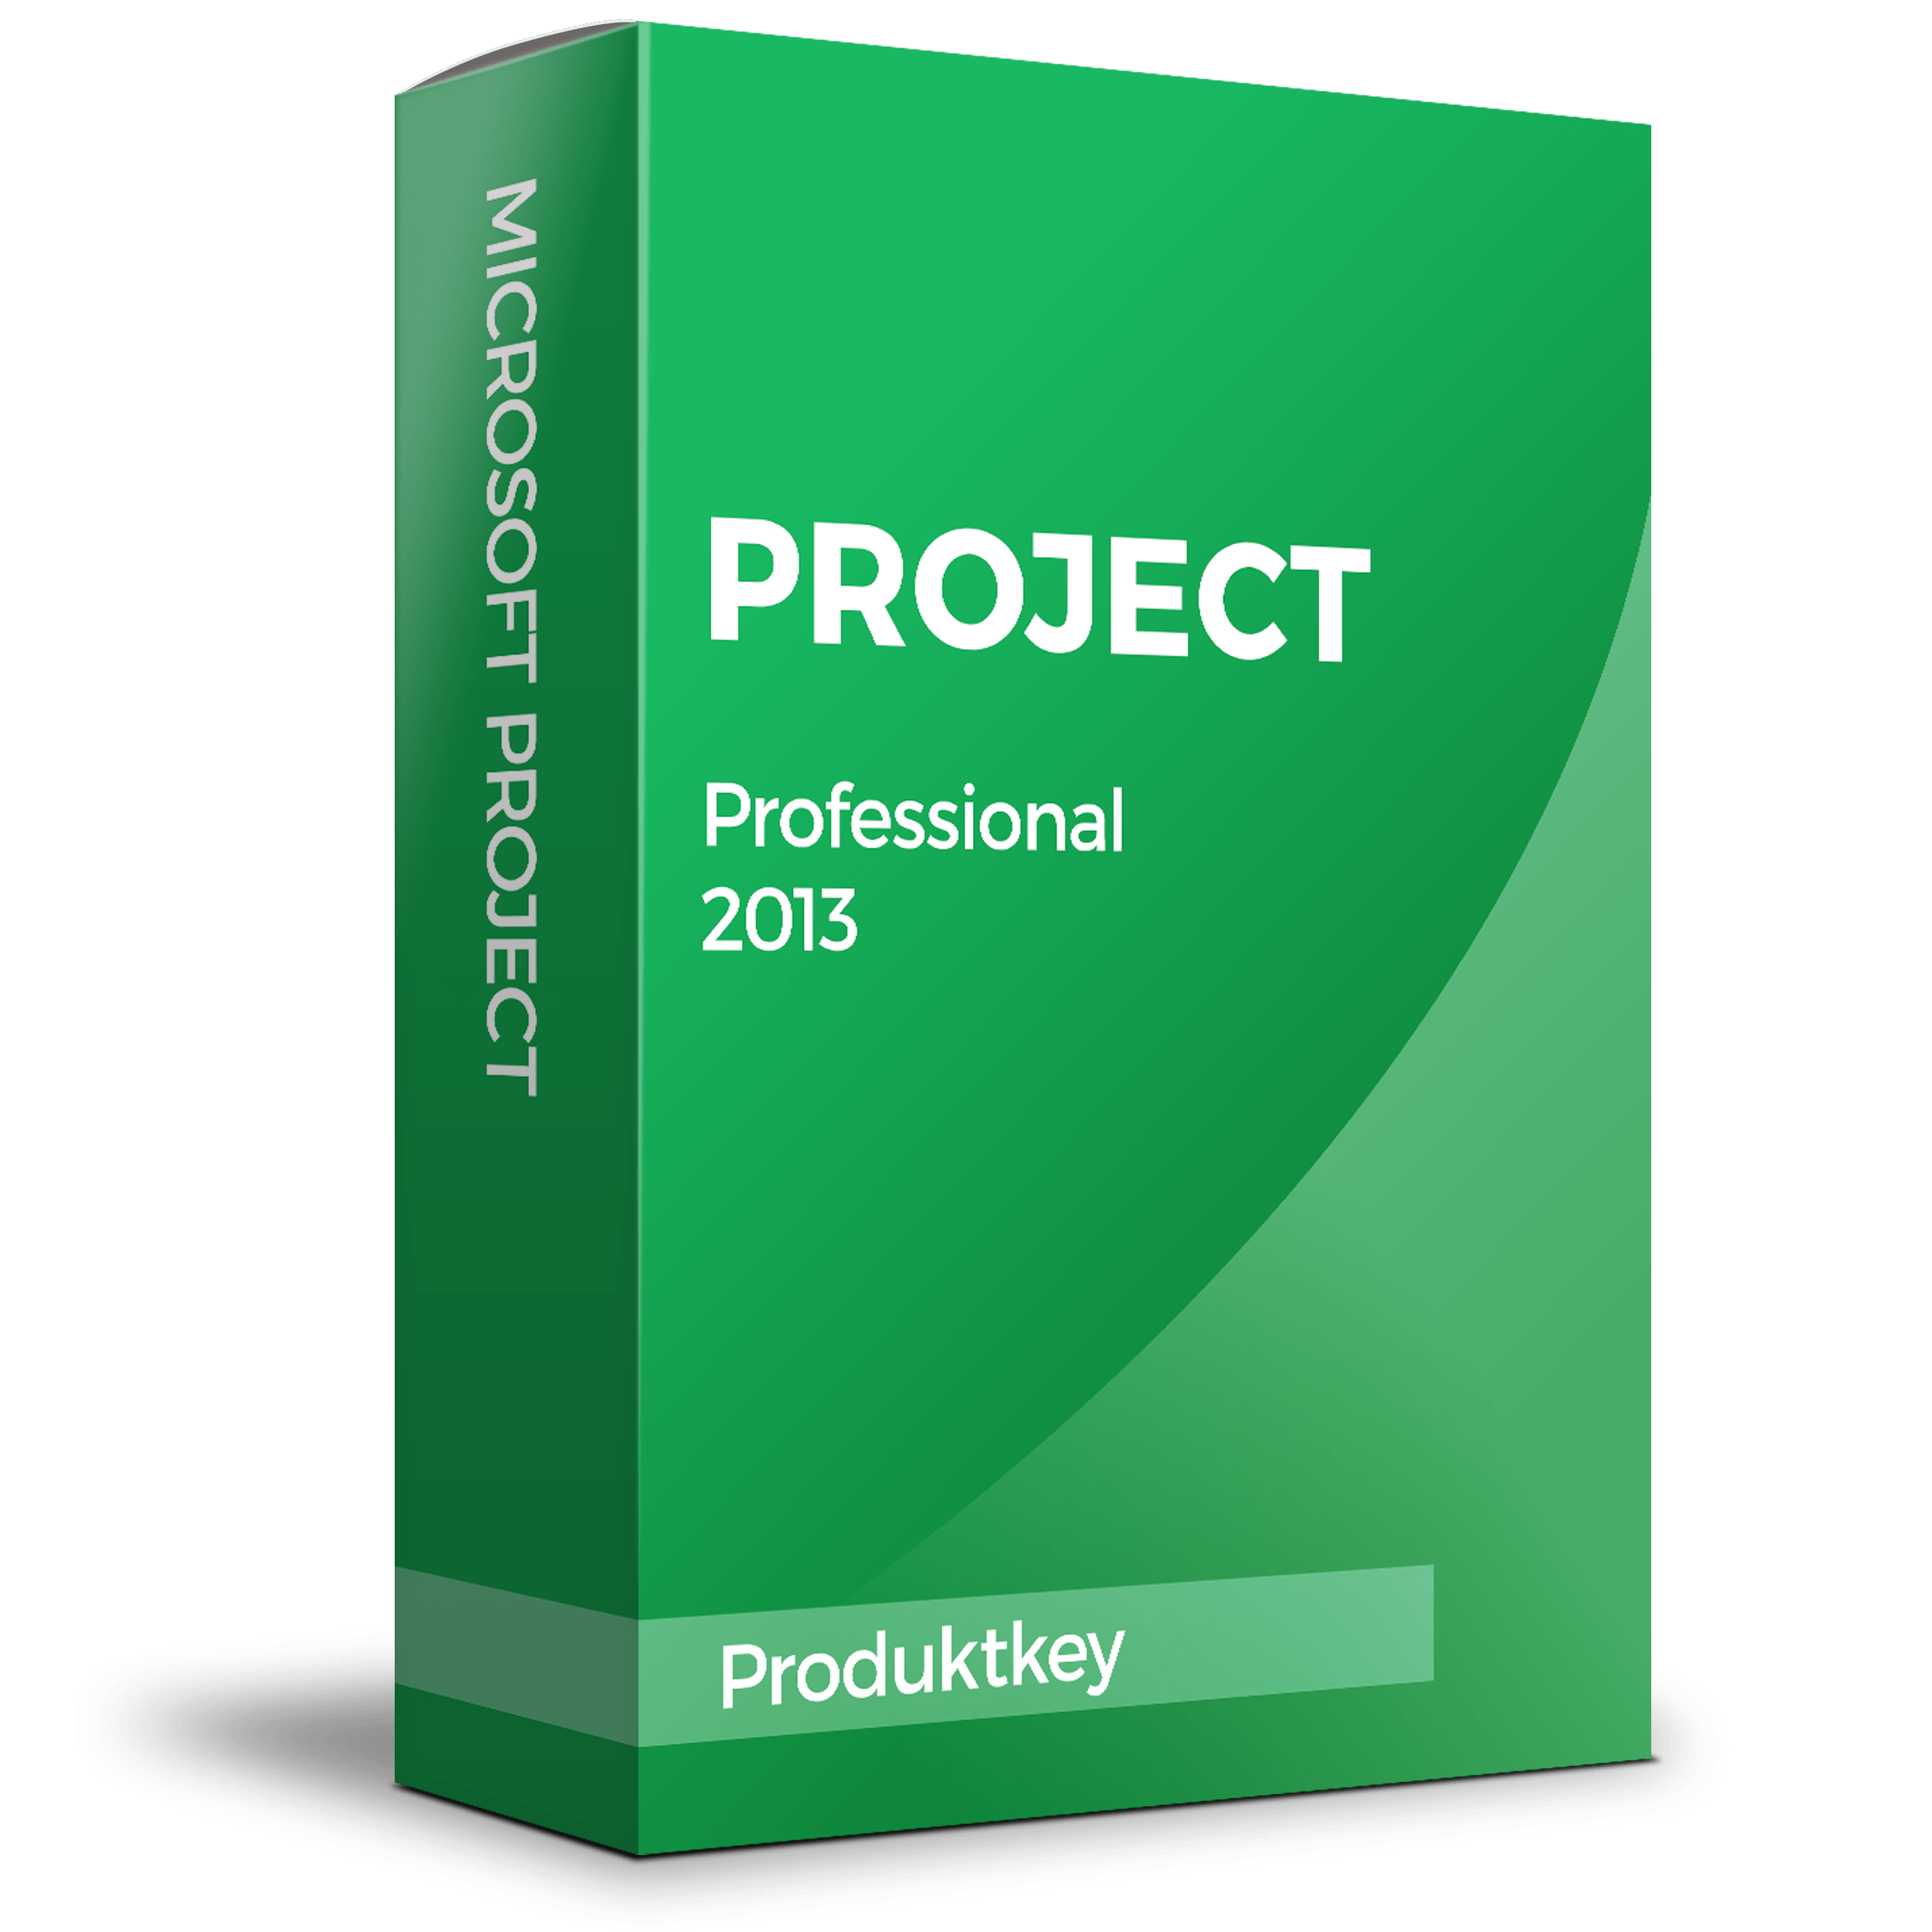 ms project 2013 free download for windows 10 64 bit